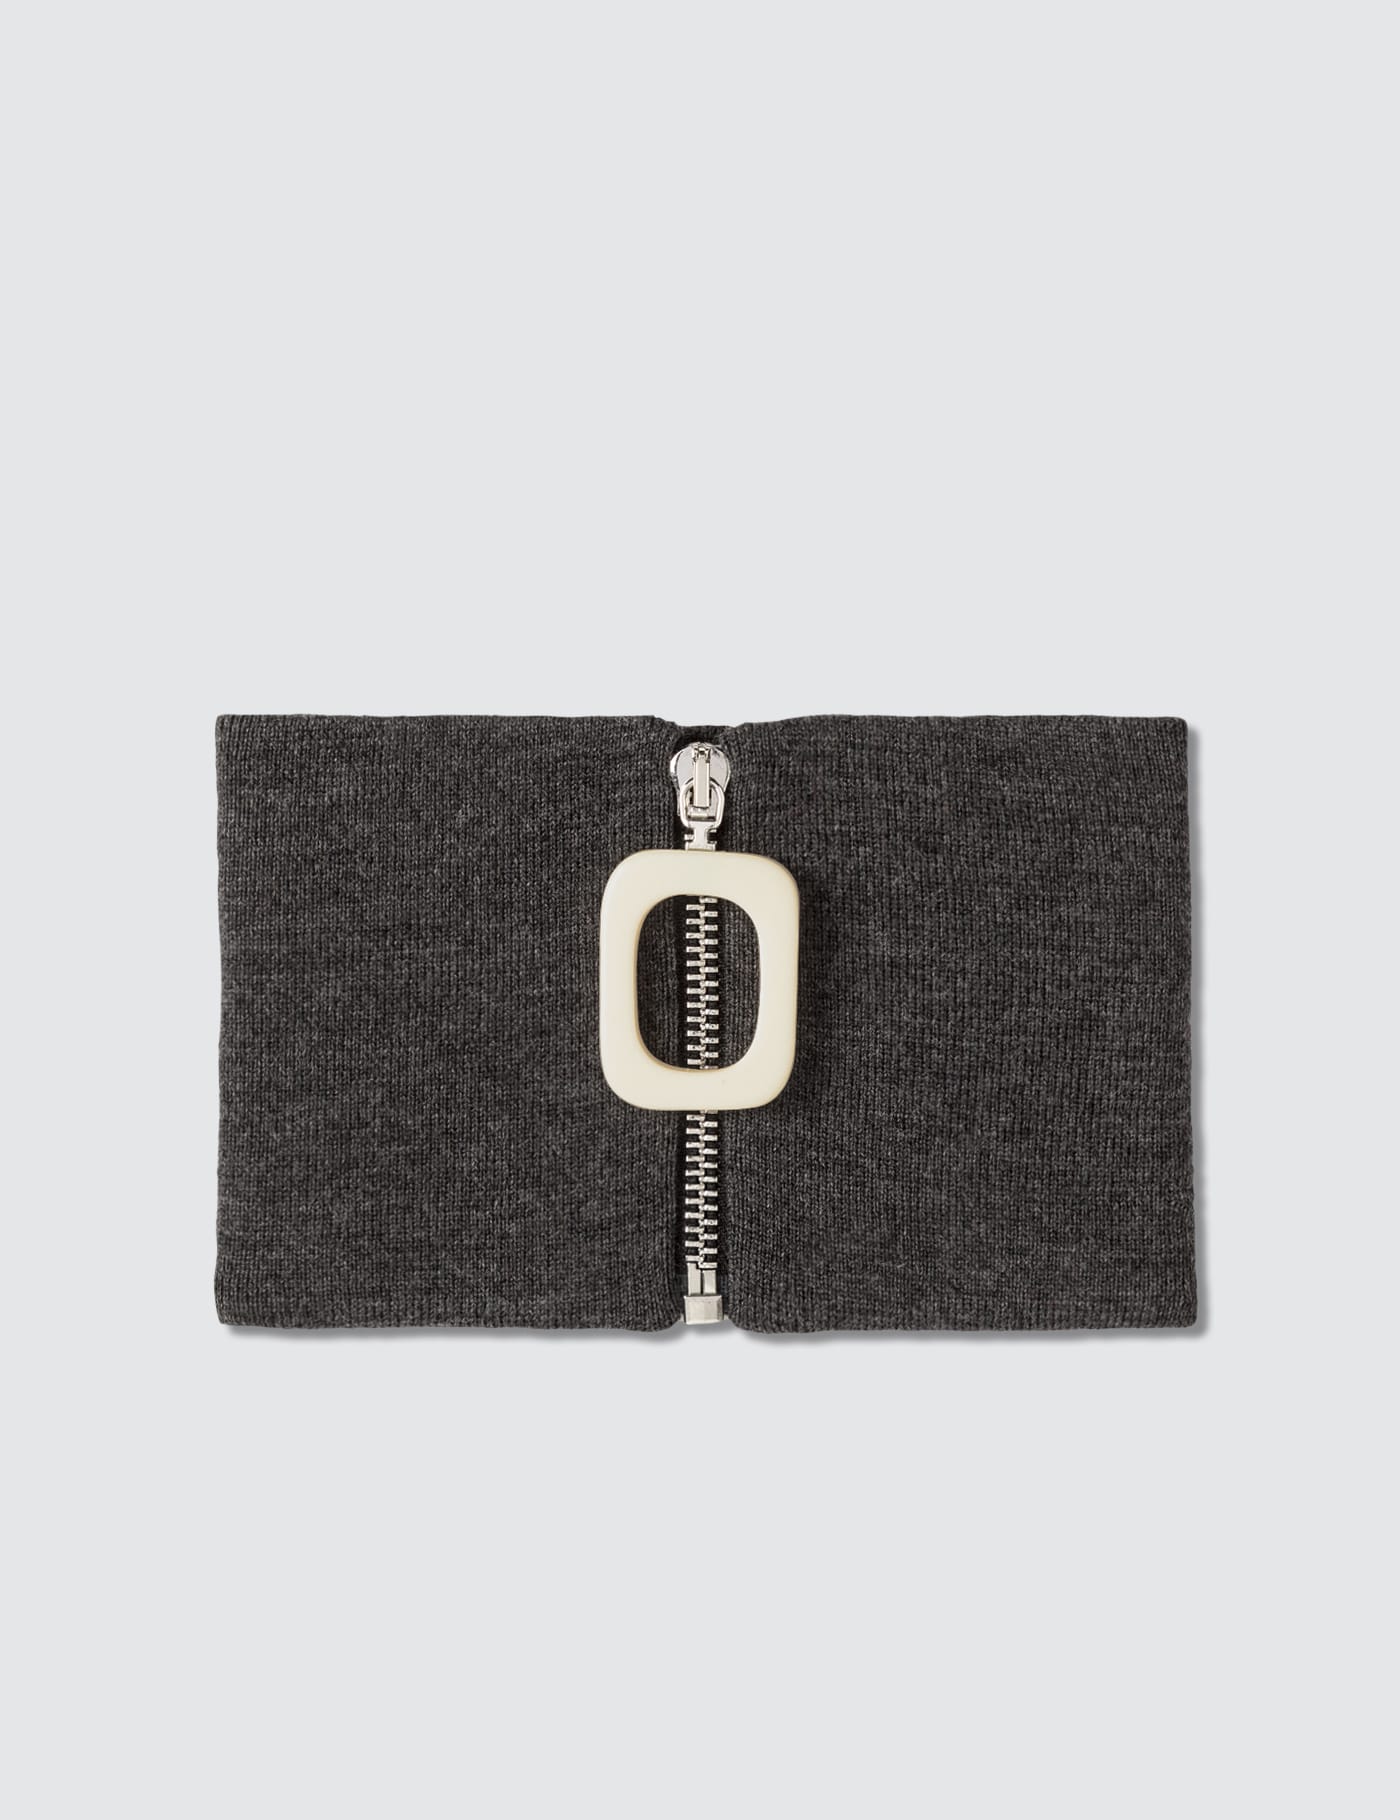 JW Anderson - JWA Neckband | HBX - Globally Curated Fashion and 